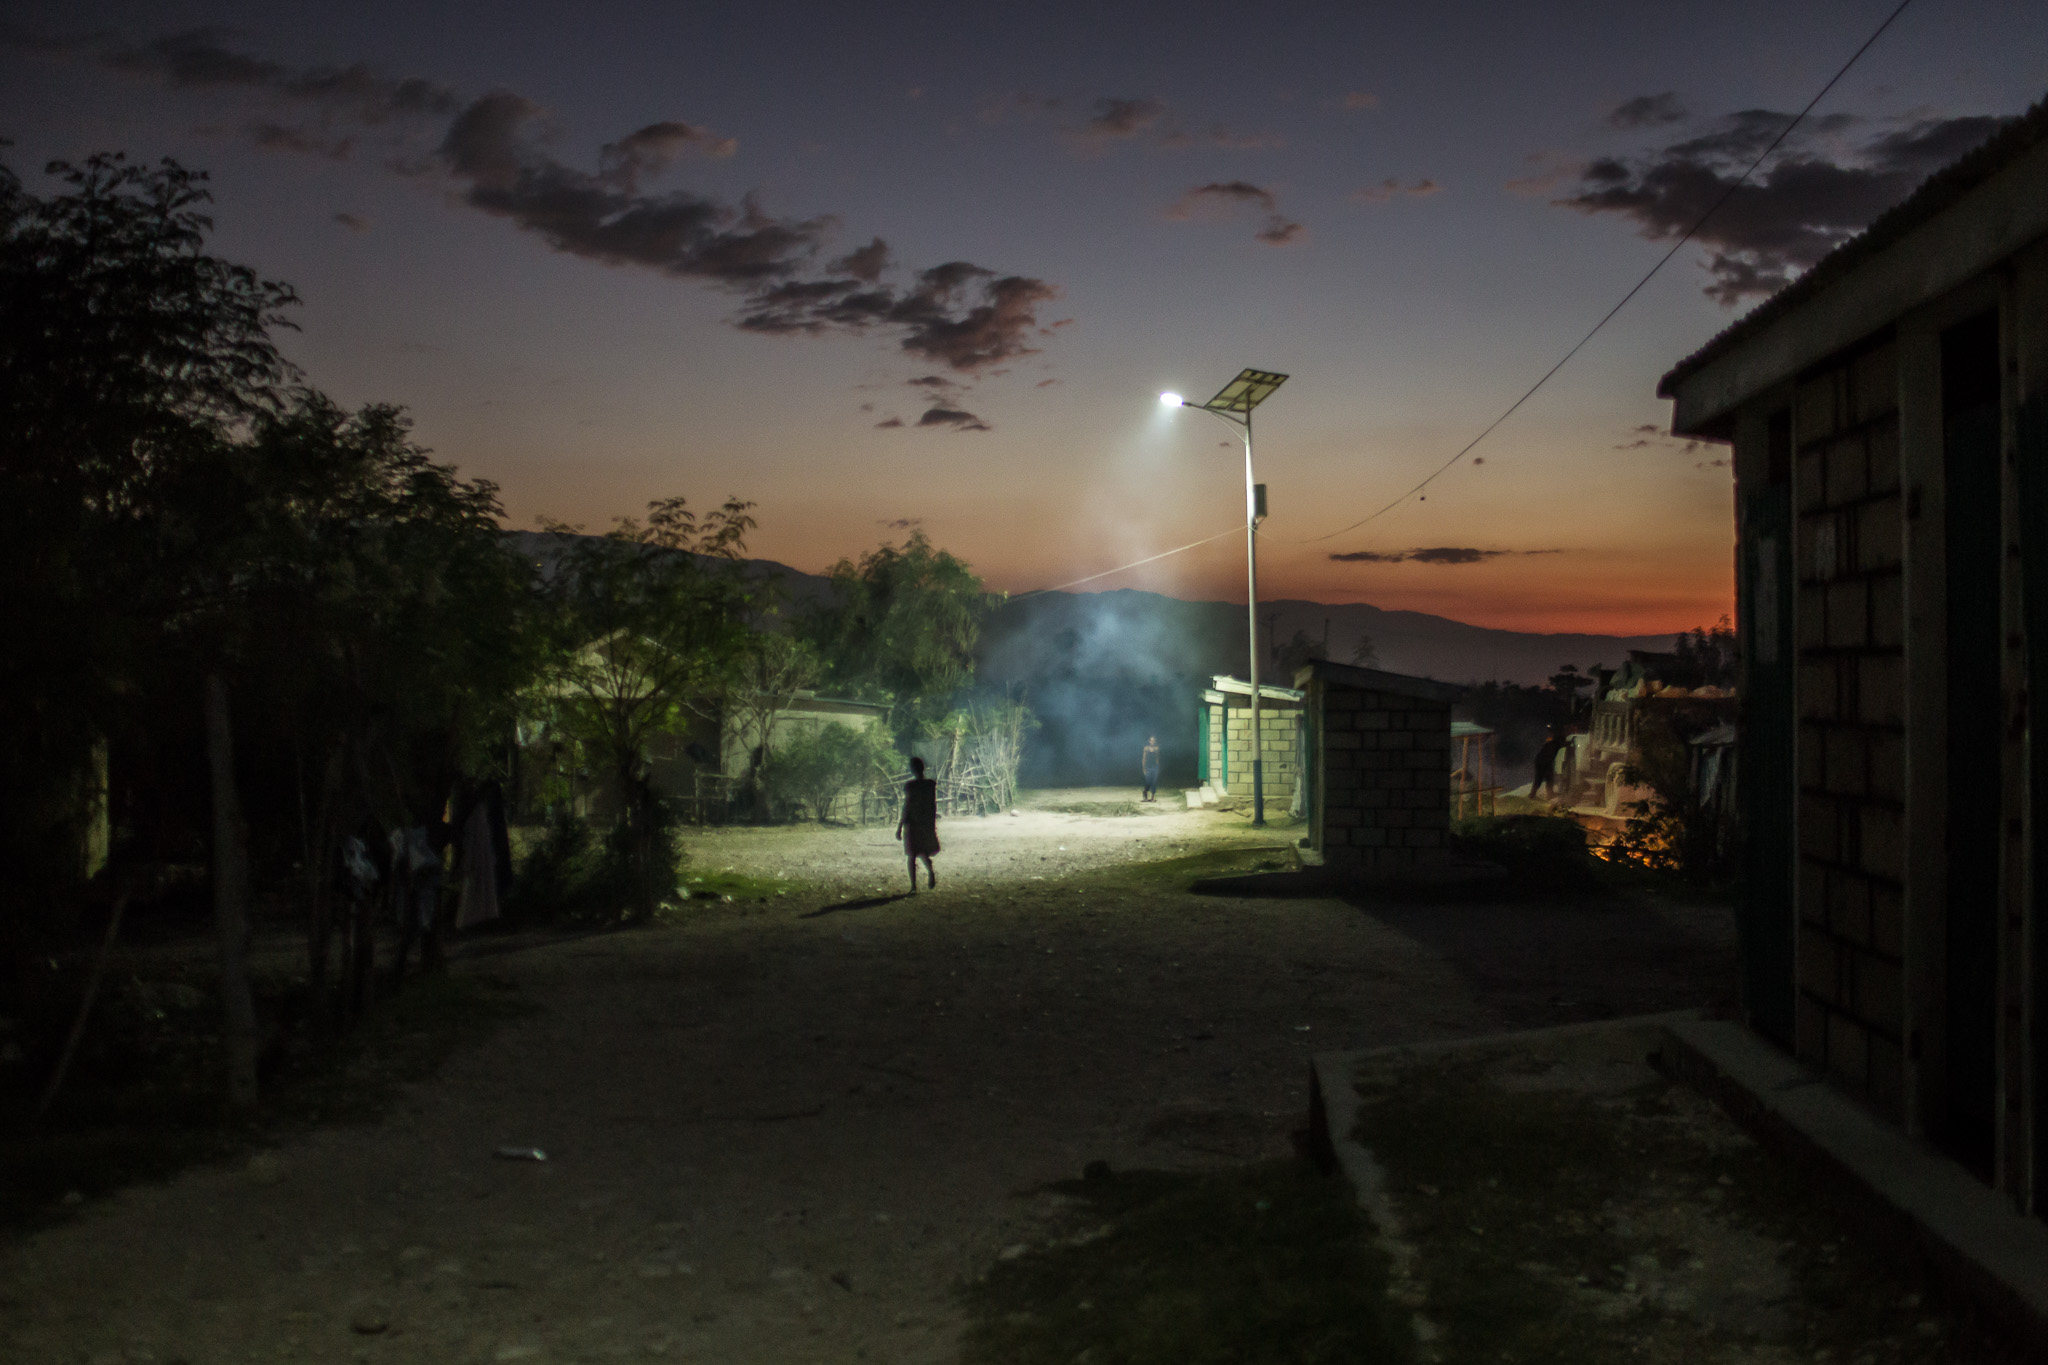  A solar-powered street light illuminates the Corail-Cesselesse camp for people displaced by the 2010 earthquake on Saturday, December 20, 2014 in Port-au-Prince, Haiti. The batteries for the lights are wearing out, and many do not last for more than